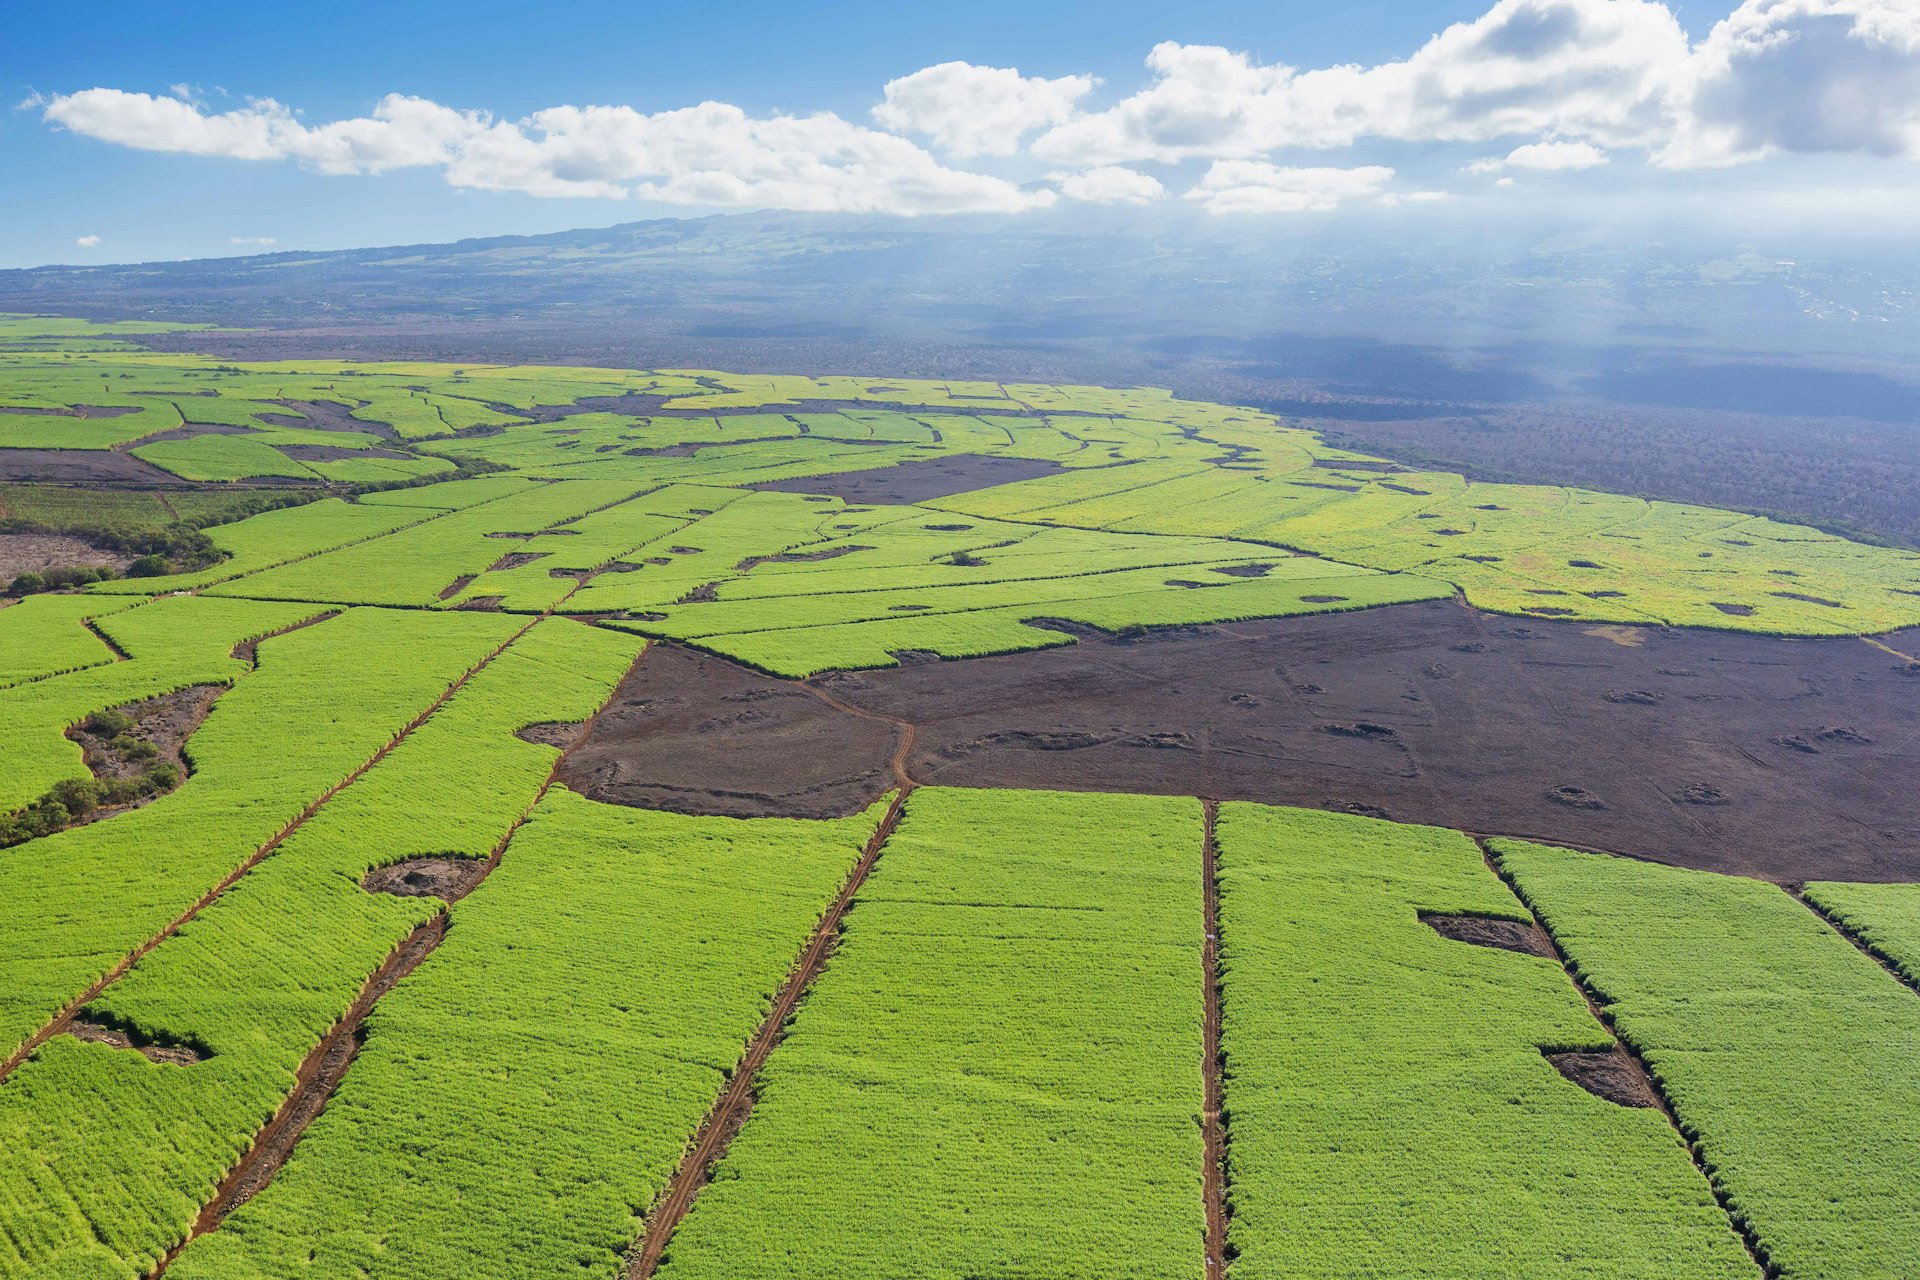 Maui’s diverse climate allows for a variety of crops, including this sugarcane field seen from above. Image by Makena Stock Media / Perspectives / Getty